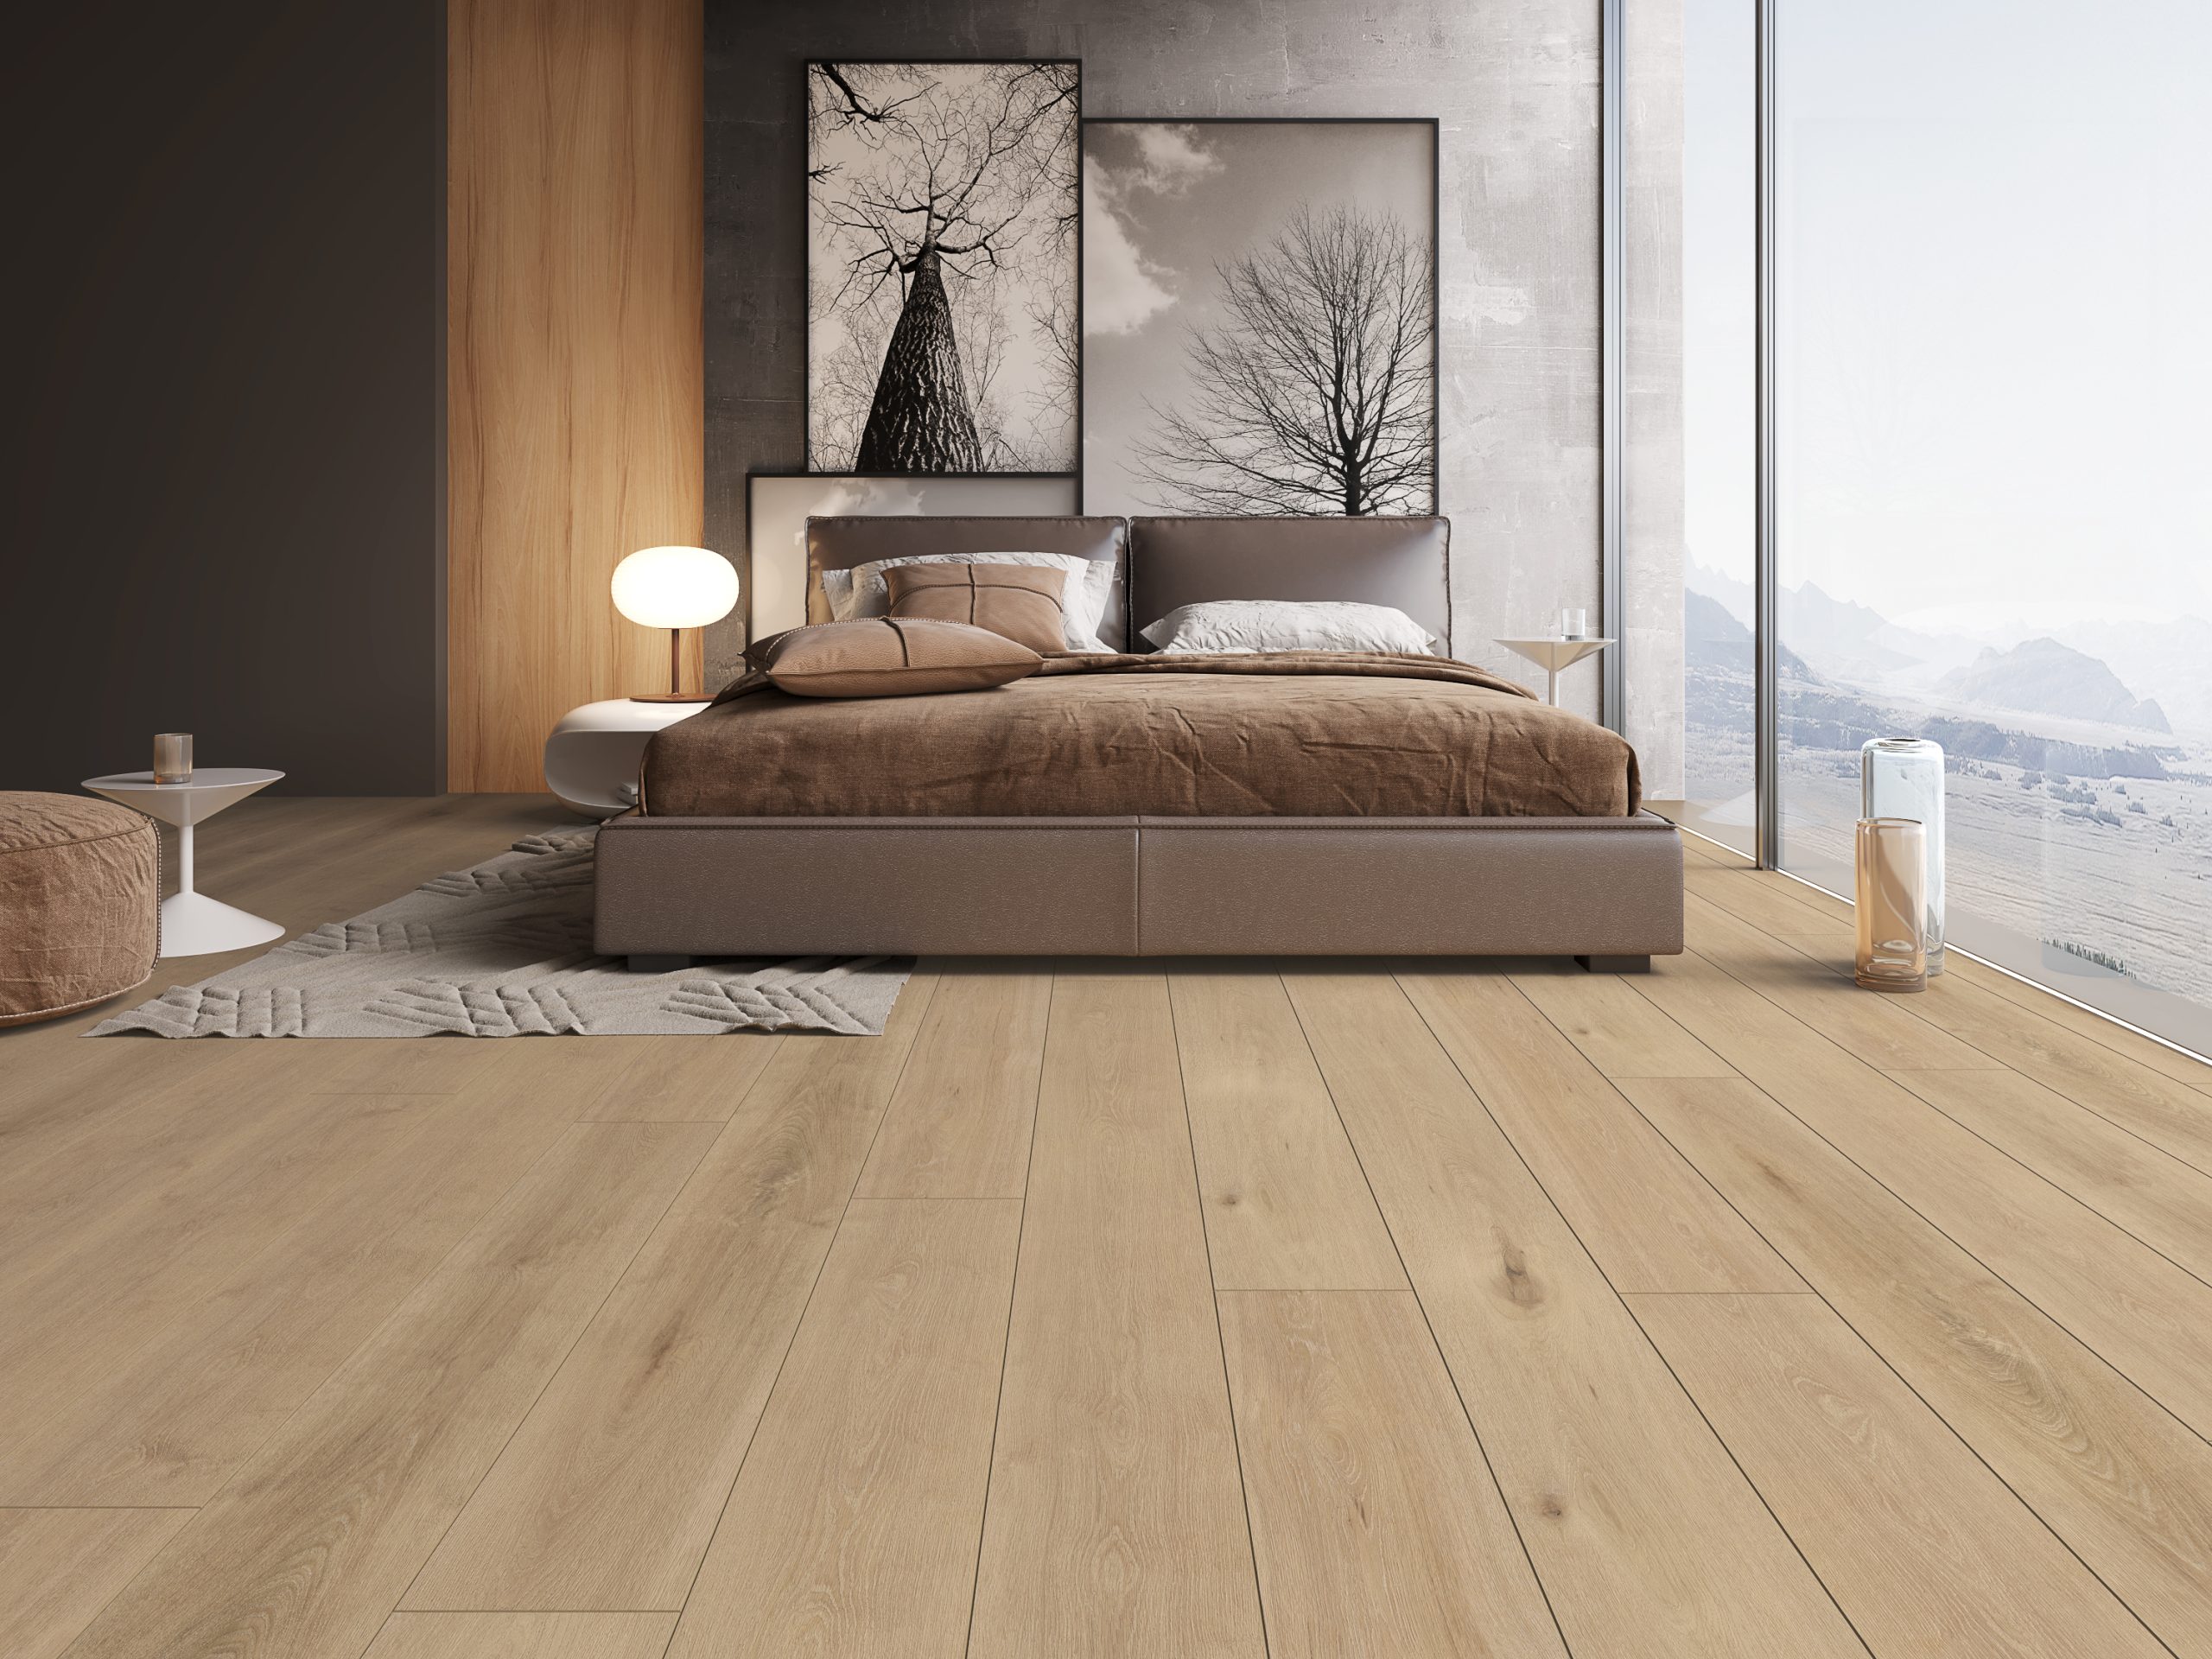 Natural White Oak Laminate Wood Flooring  with AC4 wear layer